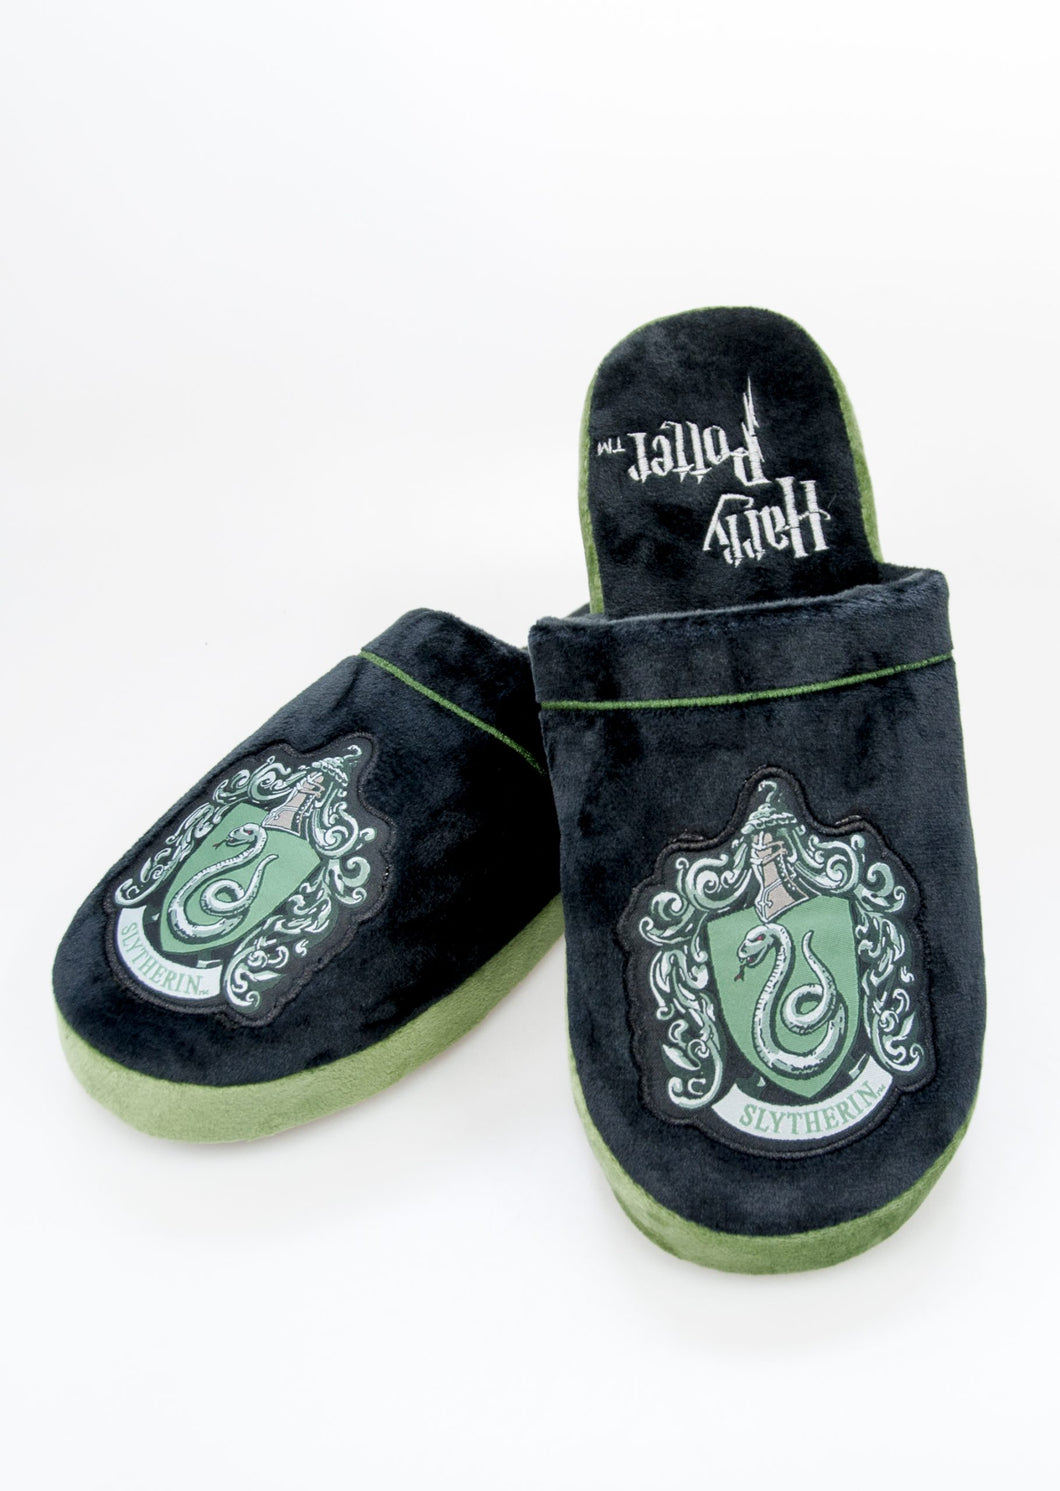 Harry Potter Slytherin Adult Mule Slippers